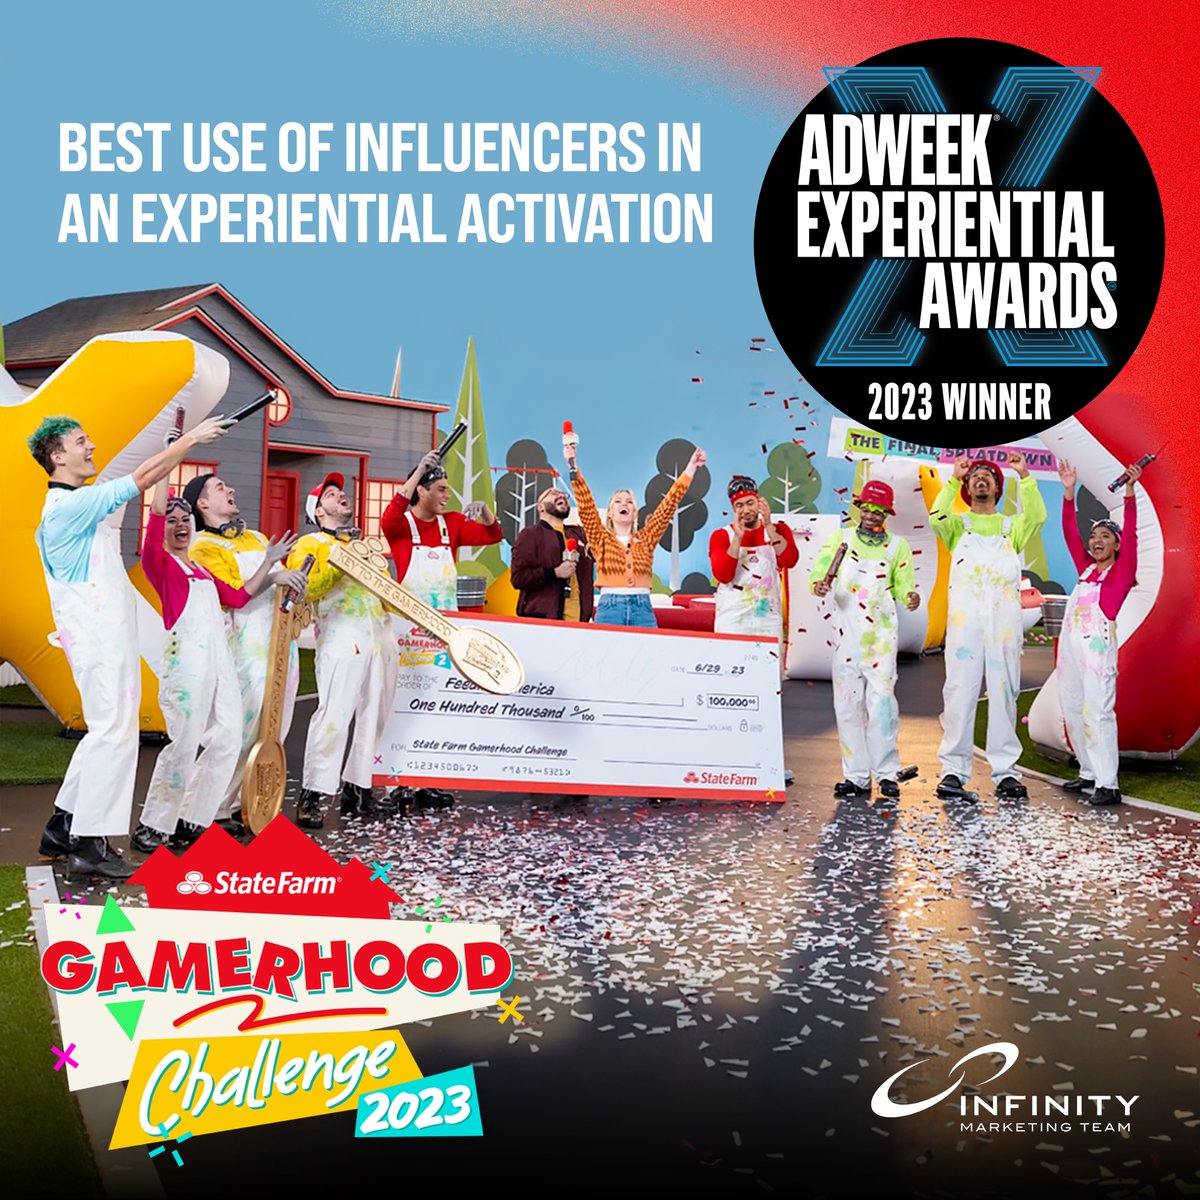 Congratulations to our @StateFarm partners and the State Farm Gamerhood Challenge 2023 for winning the @Adweek experiential award for Best Use of Influencers in an Experiential Activation! You’ve disrupted the Esports and gaming landscape forever! IMT is proud to have been on…